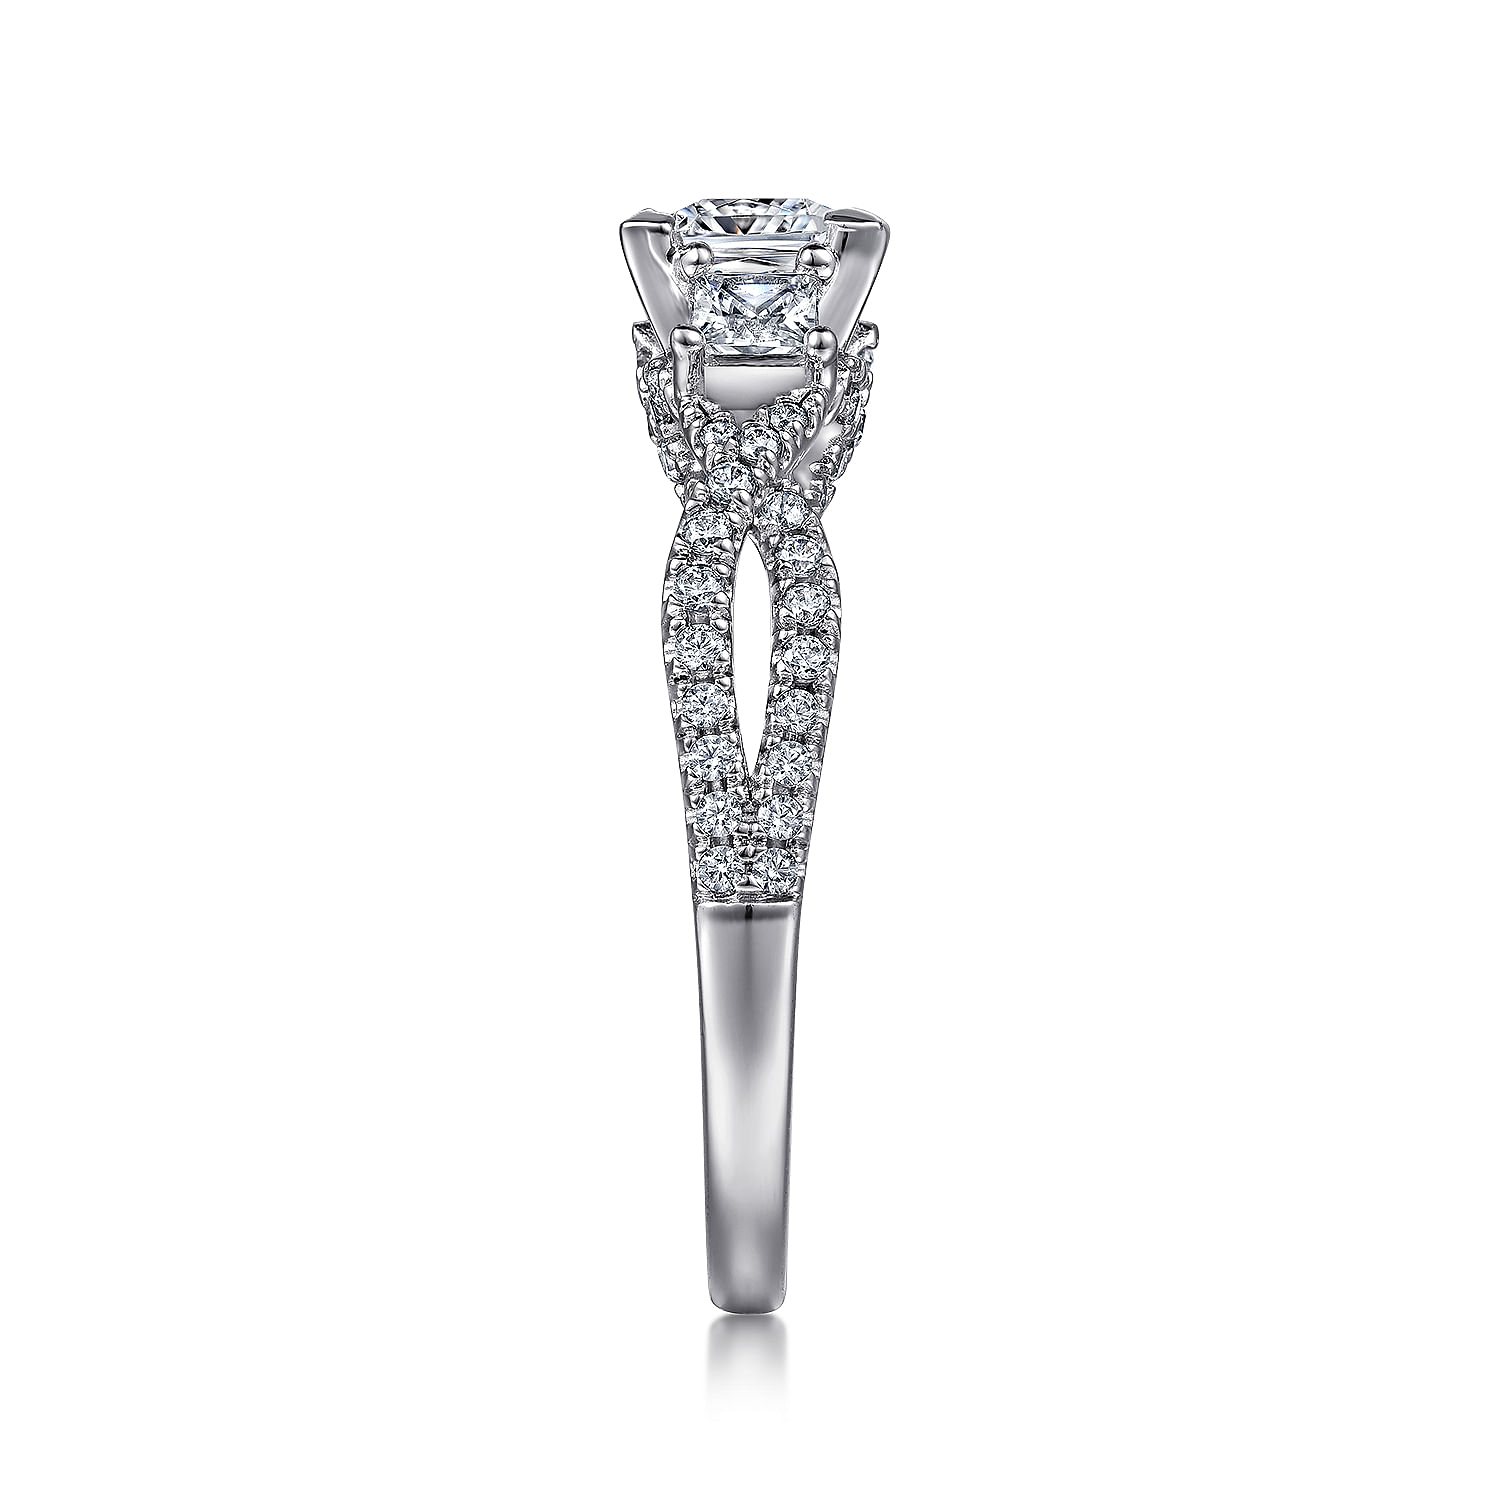 Princess Cut Engagement Rings: A Style of Royalty | Gabriel & Co.